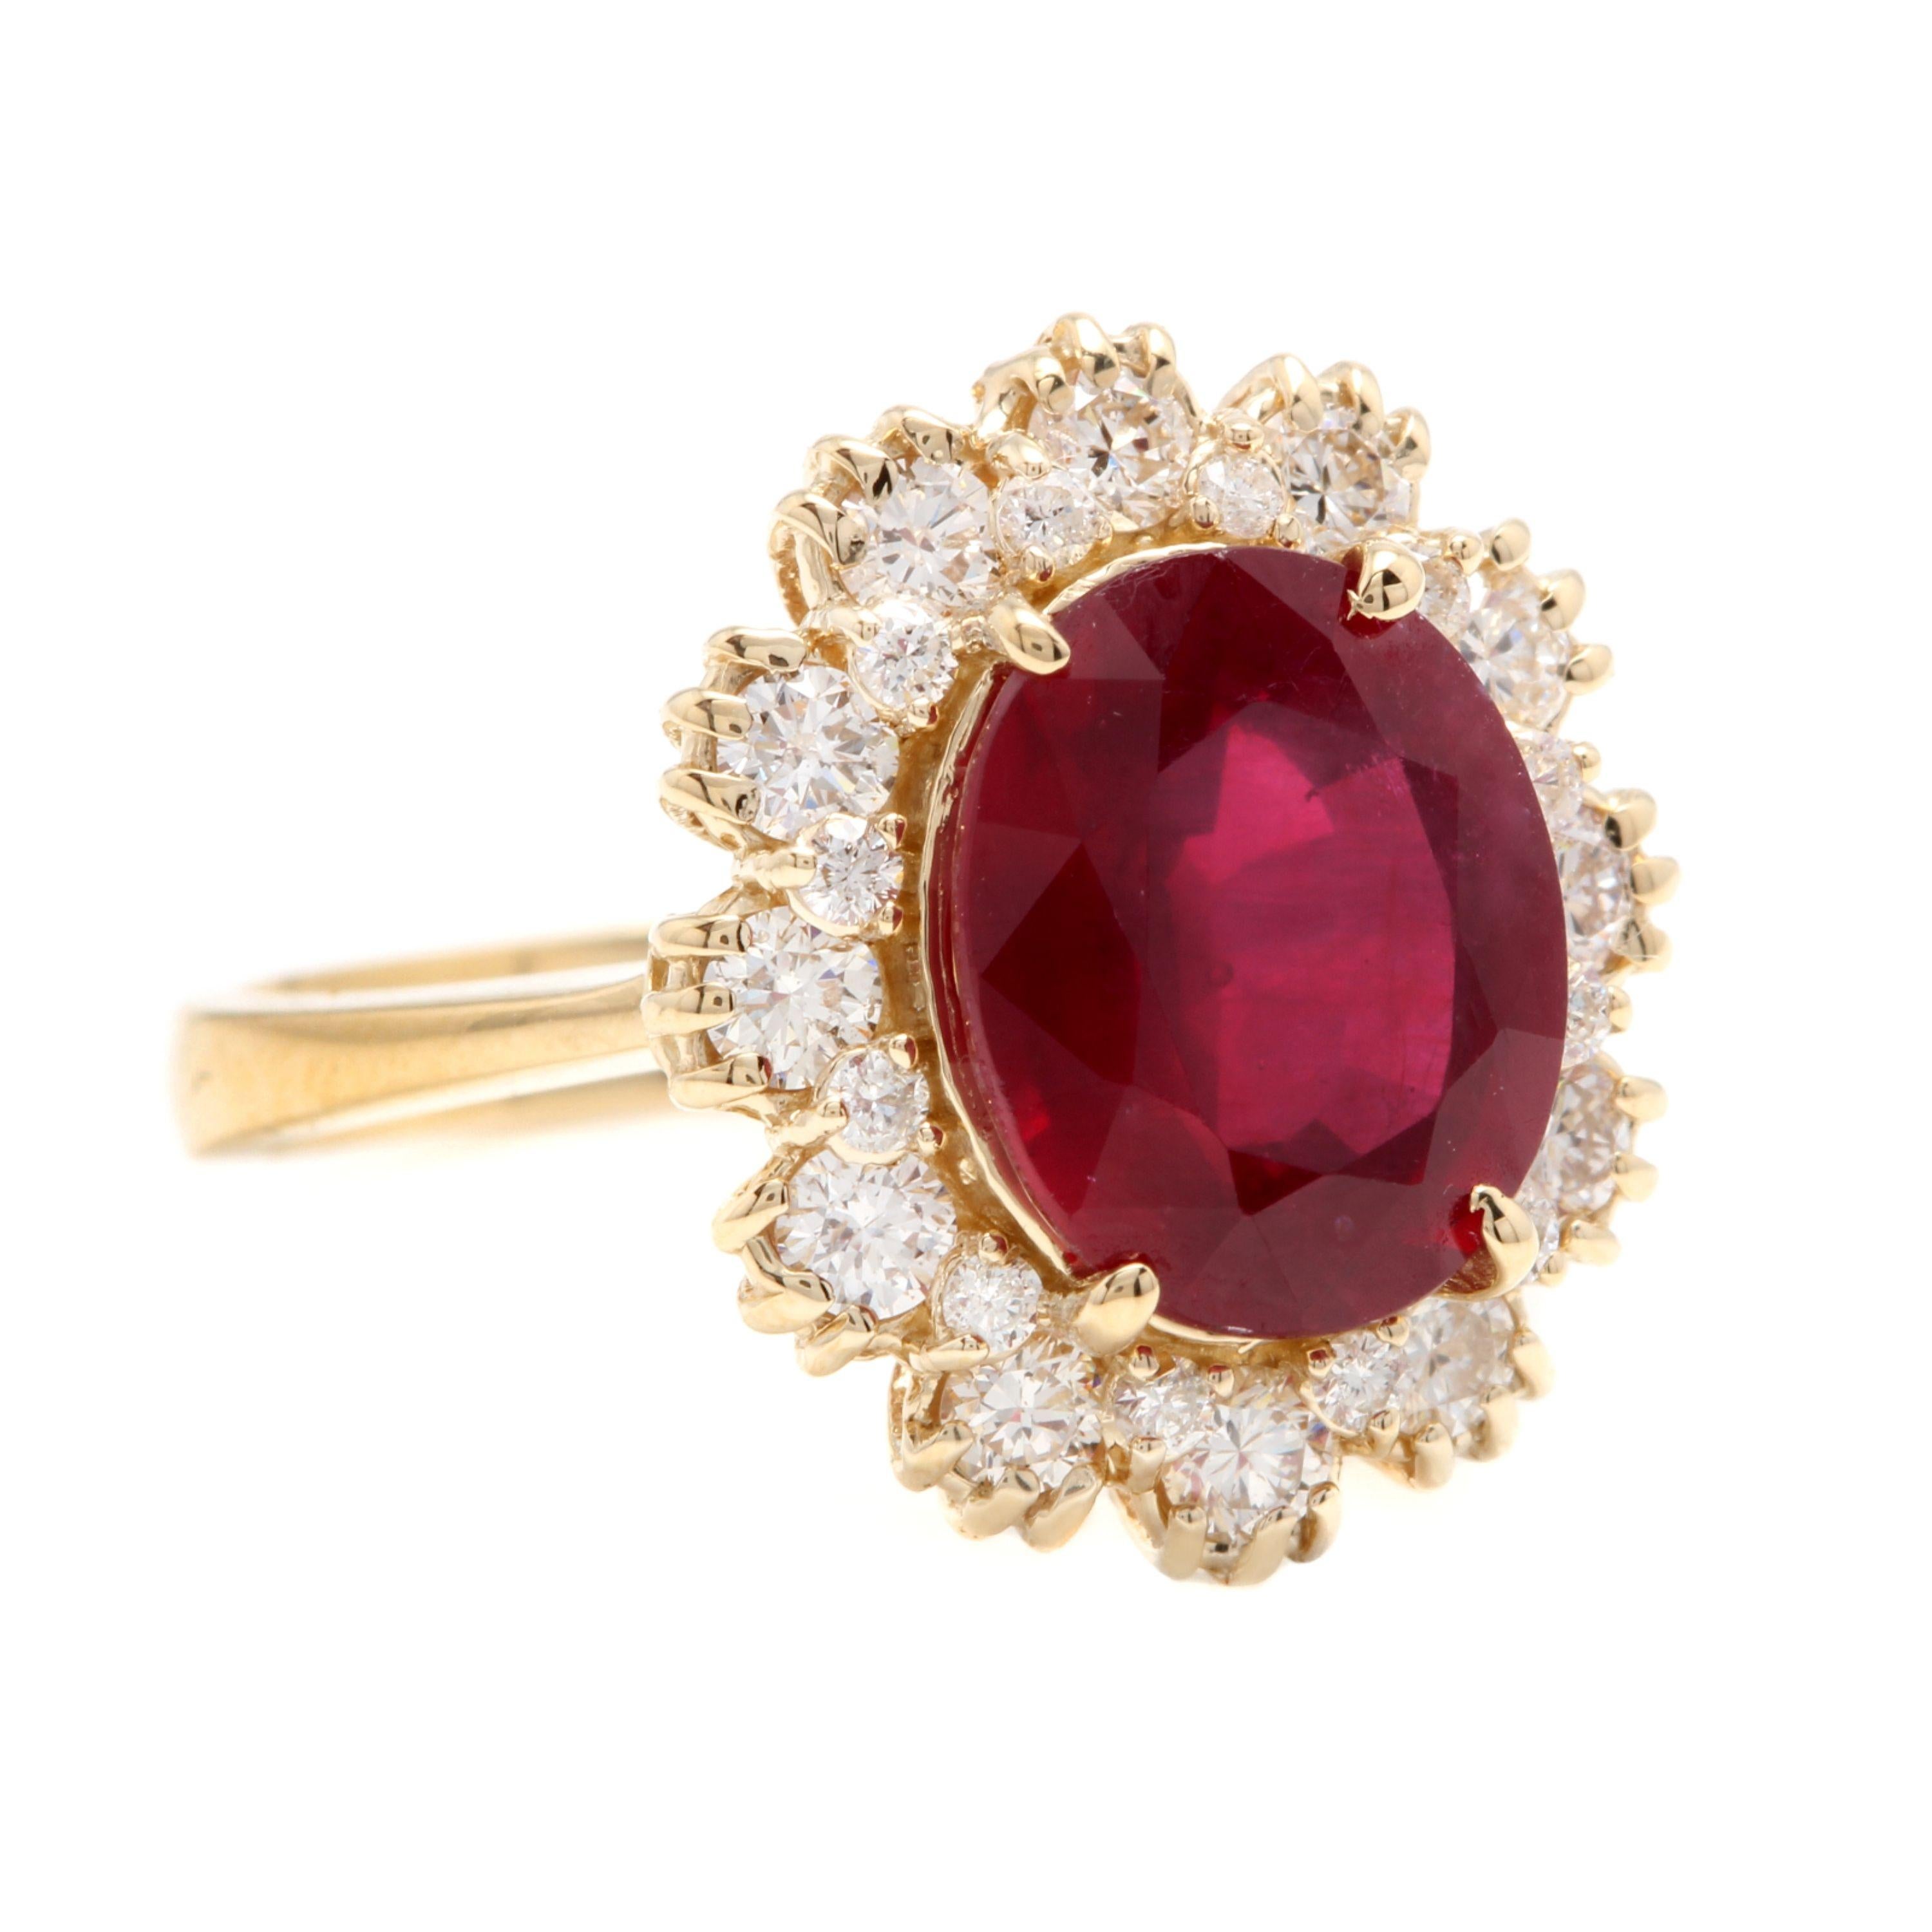 7.20 Carats Impressive Natural Red Ruby and Diamond 18K Yellow Gold Ring

Total Red Ruby Weight is Approx. 6.00 Carats (Lead Glass Filled)

Ruby Measures: Approx. 11.00 x 9.00mm

Natural Round Diamonds Weight: Approx. 1.20 Carats (color G-H /